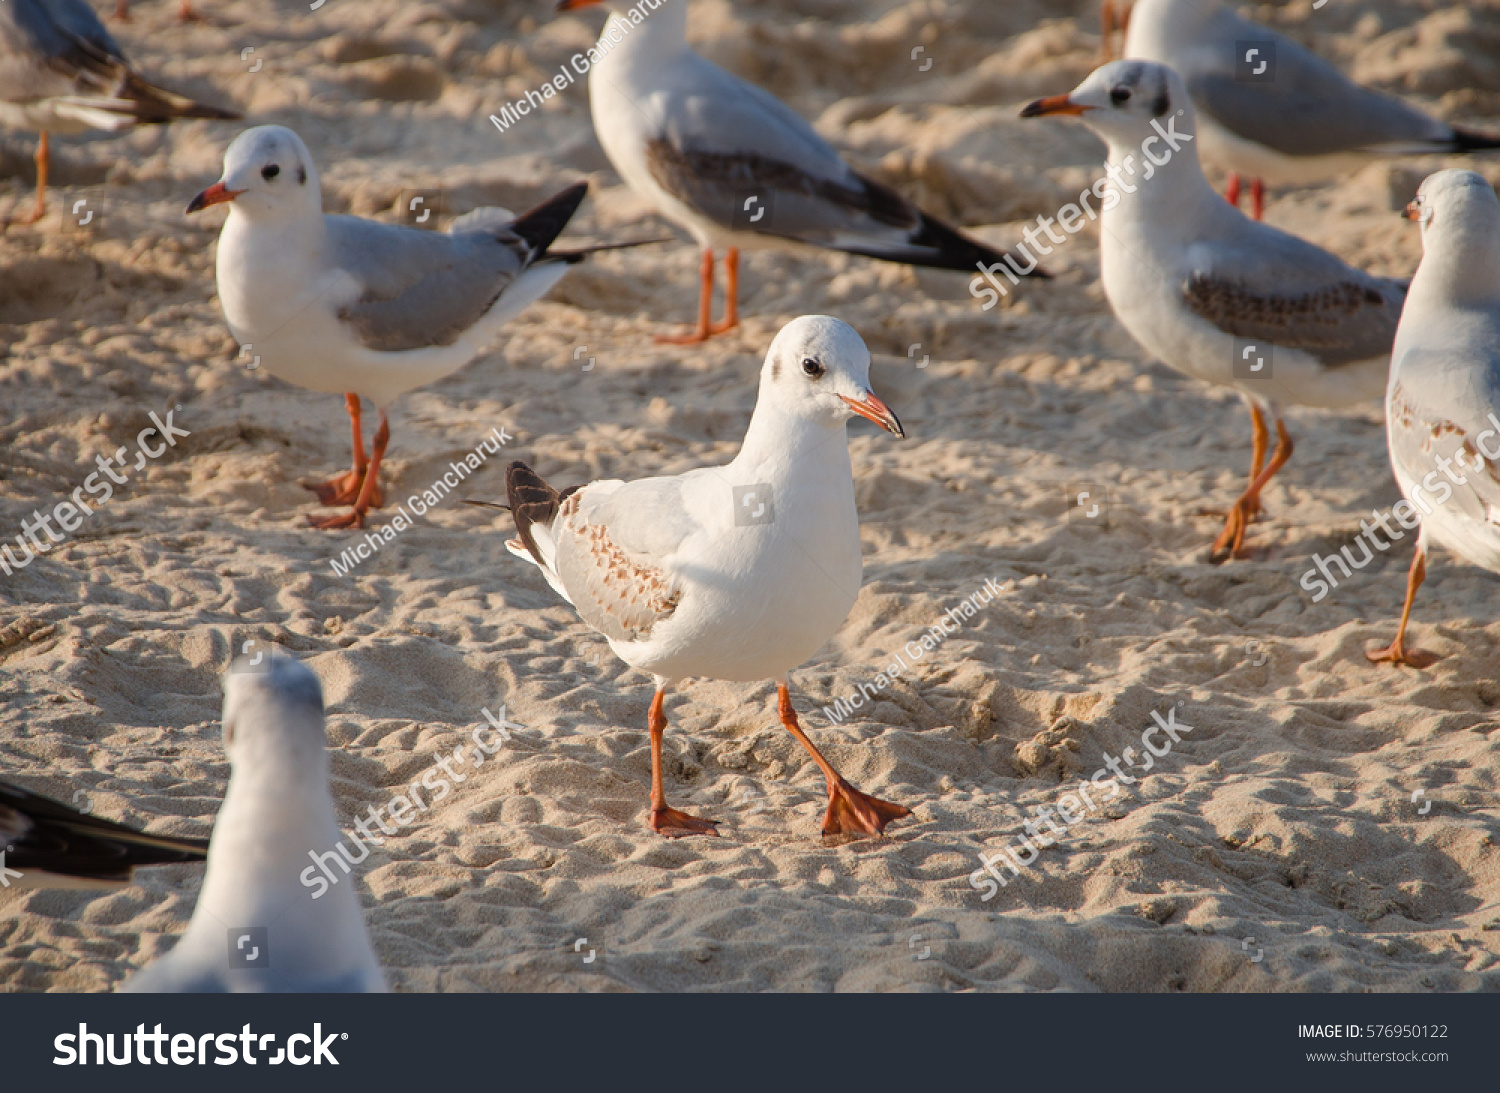 A common gull (Larus canus) strides ahead with confidence on the beach. #576950122